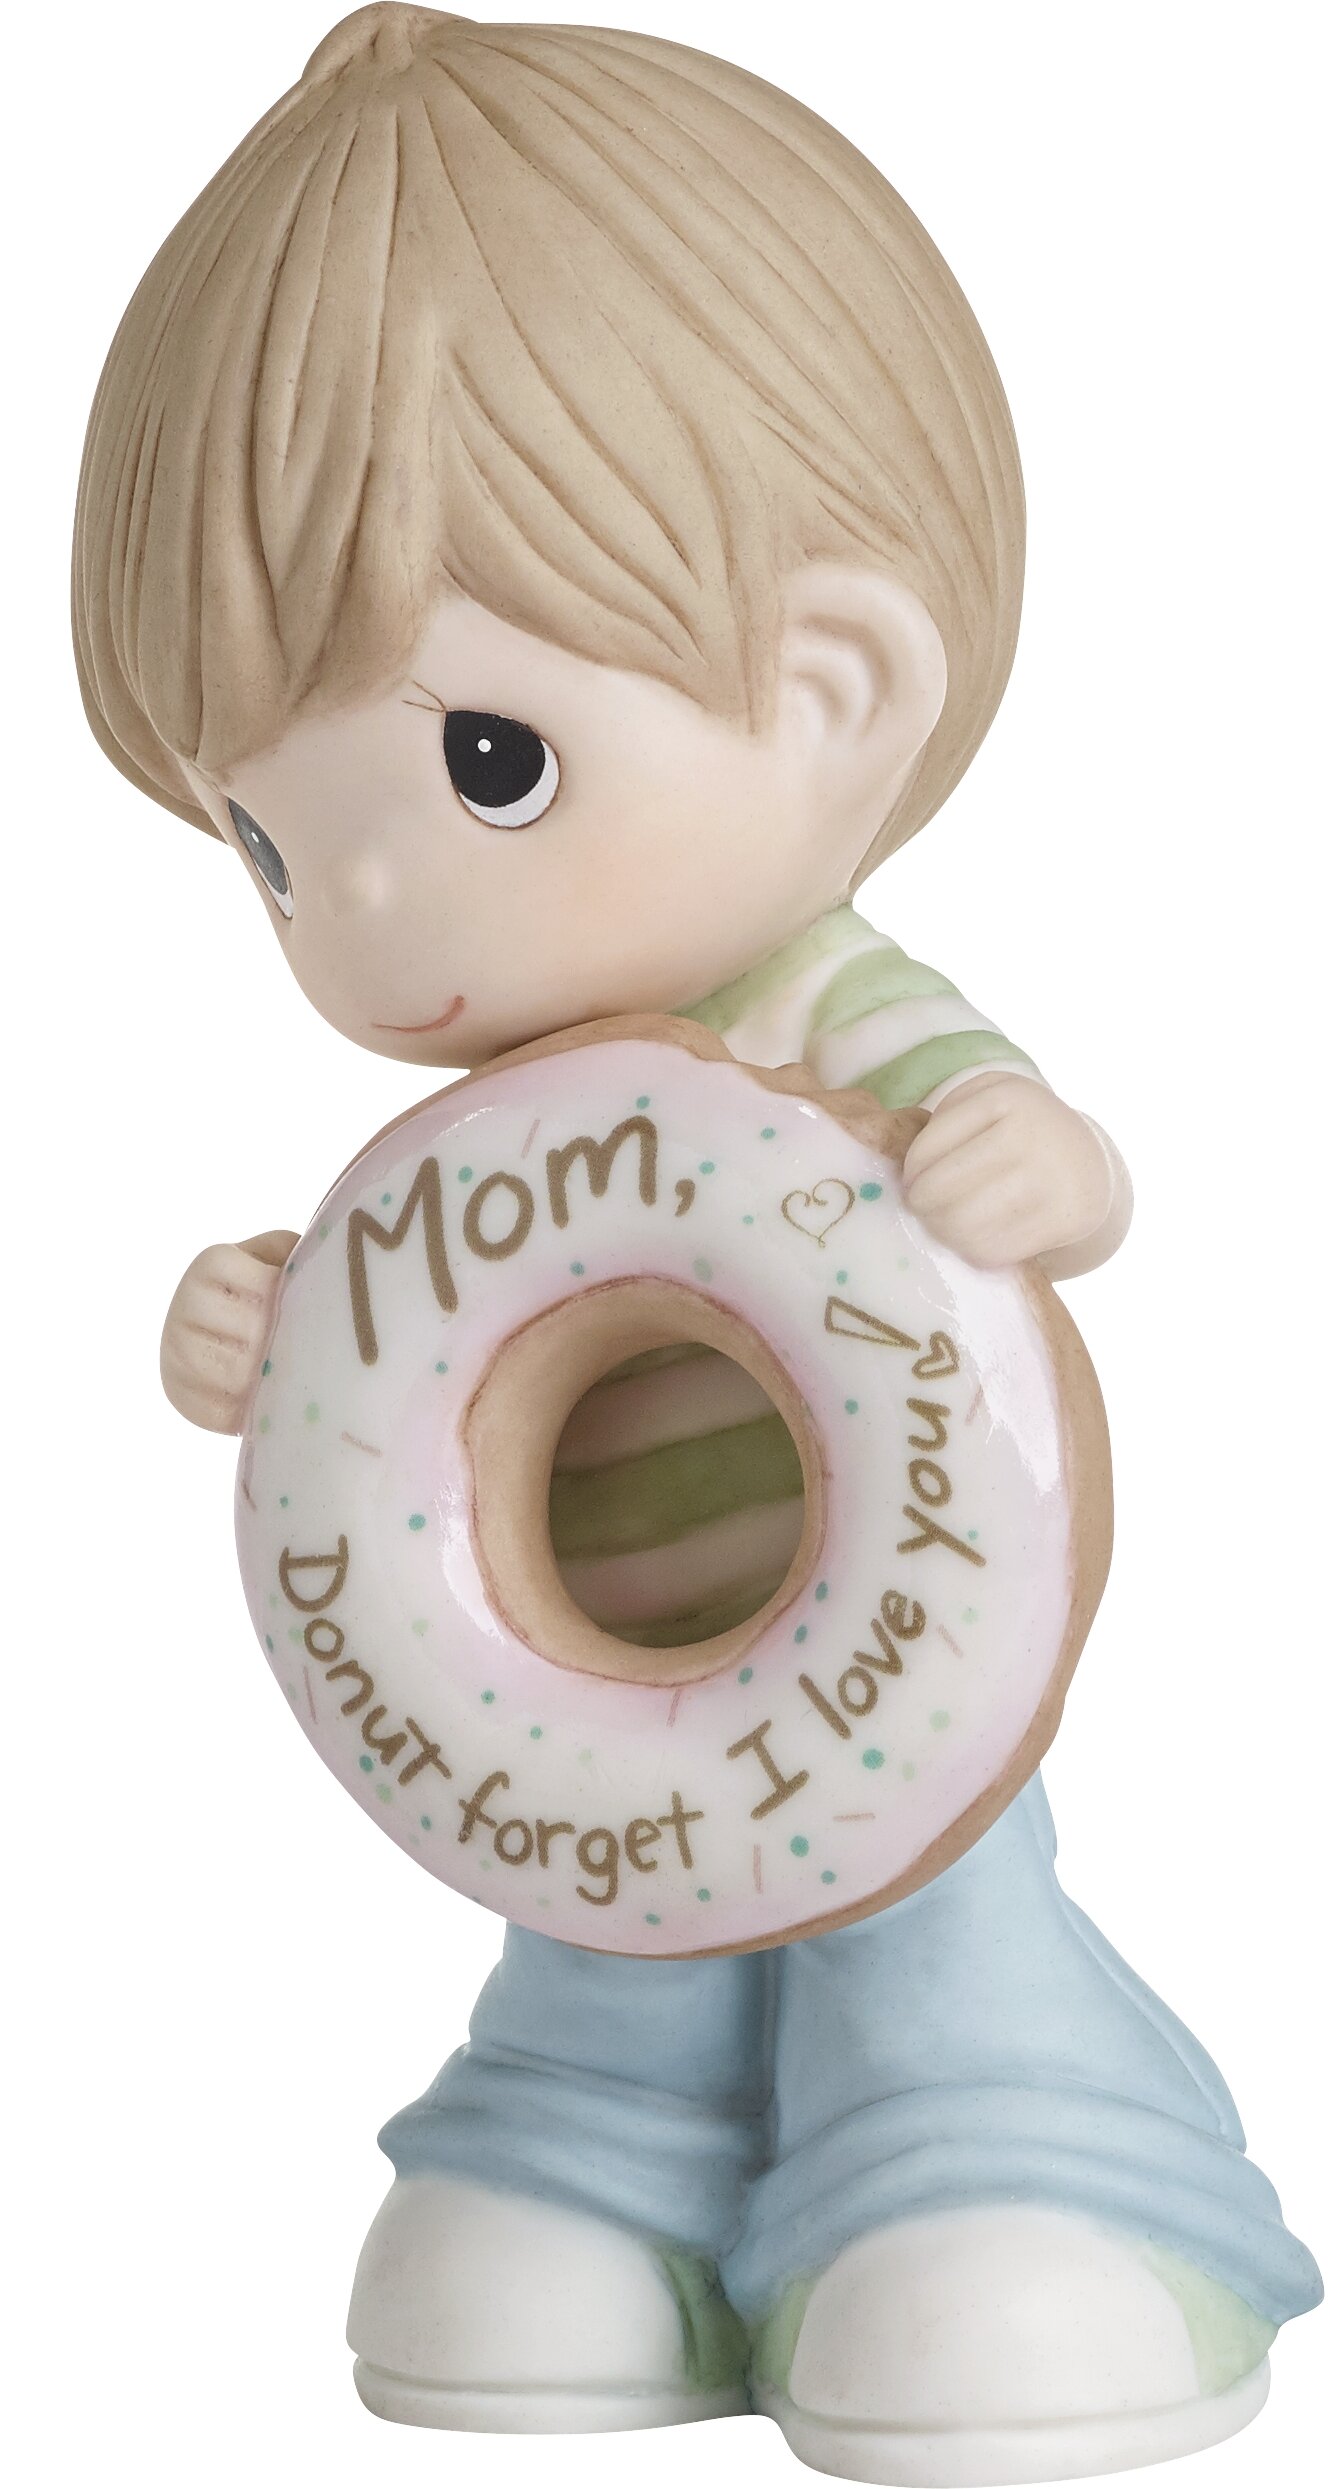 Precious Moments 193014 Mom Forget I Love You Boy with Donut Bisque Porcelain Figurine Multicolor One Size 